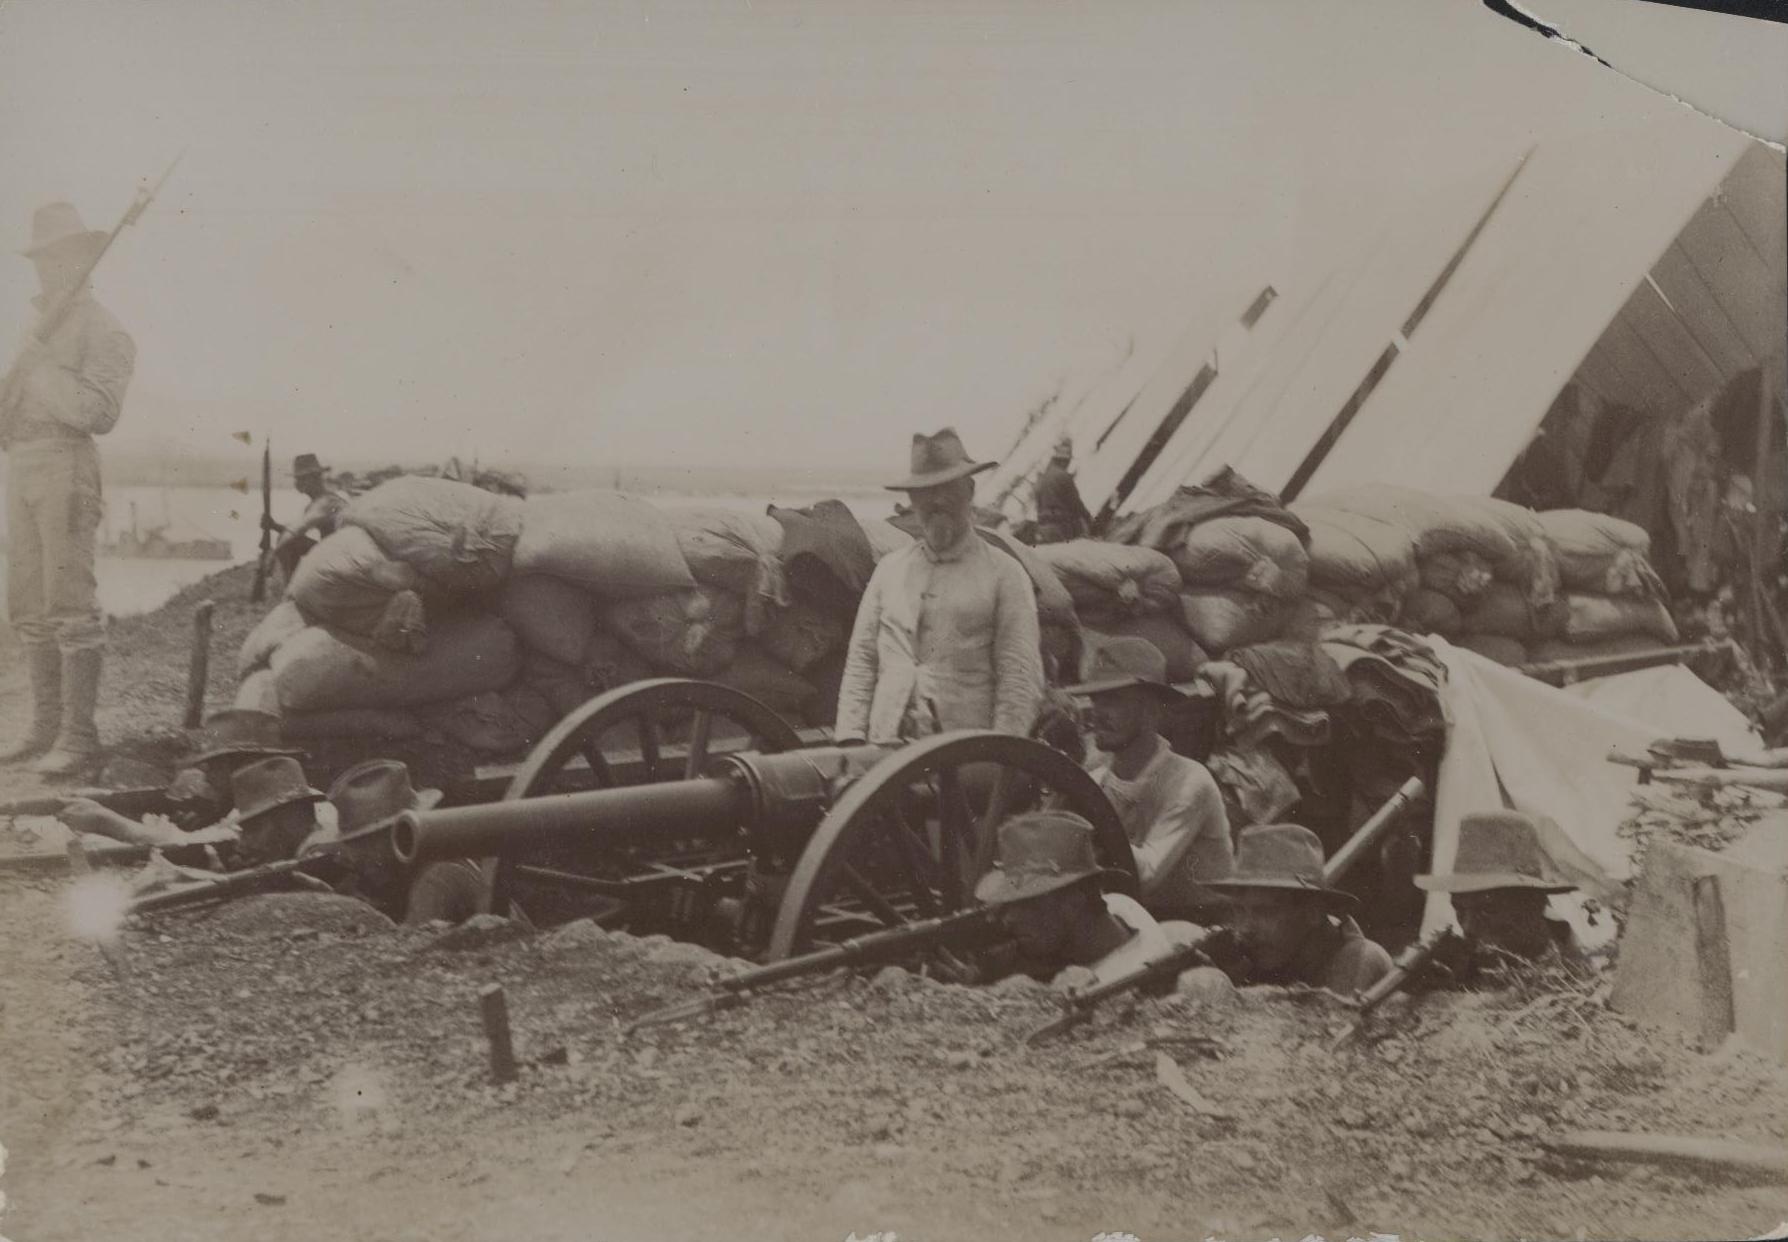 a man standing near many old military equipment